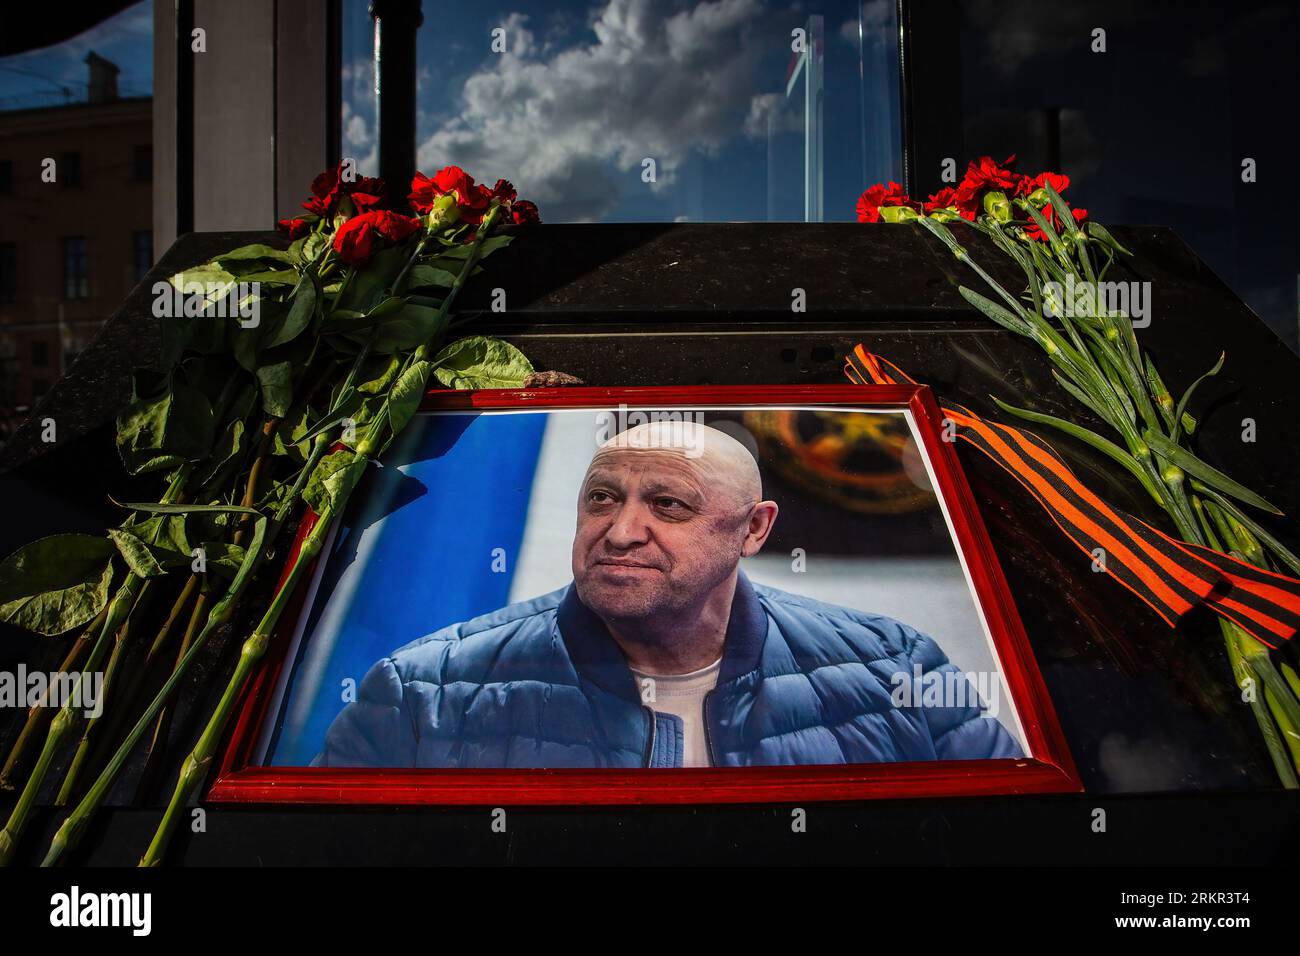 A portrait of Yevgeny Prigozhin, head of the private military company Wagner, and flowers laid in his memory at a cafe on Universitetskaya Embankment in St. Petersburg, which belongs to him. On Wednesday, August 23, the Federal Air Transport Agency confirmed in a statement the death of 10 people who were on board a business jet belonging to businessman and founder of Wagner PMC Yevgeny Prigozhin, which crashed in the Tver region, Russia. The Federal Air Transport Agency also confirmed that Yevgeny Prigozhin was on the list of 10 people on board, among whom 3 were crew members. Also on this lis Stock Photo